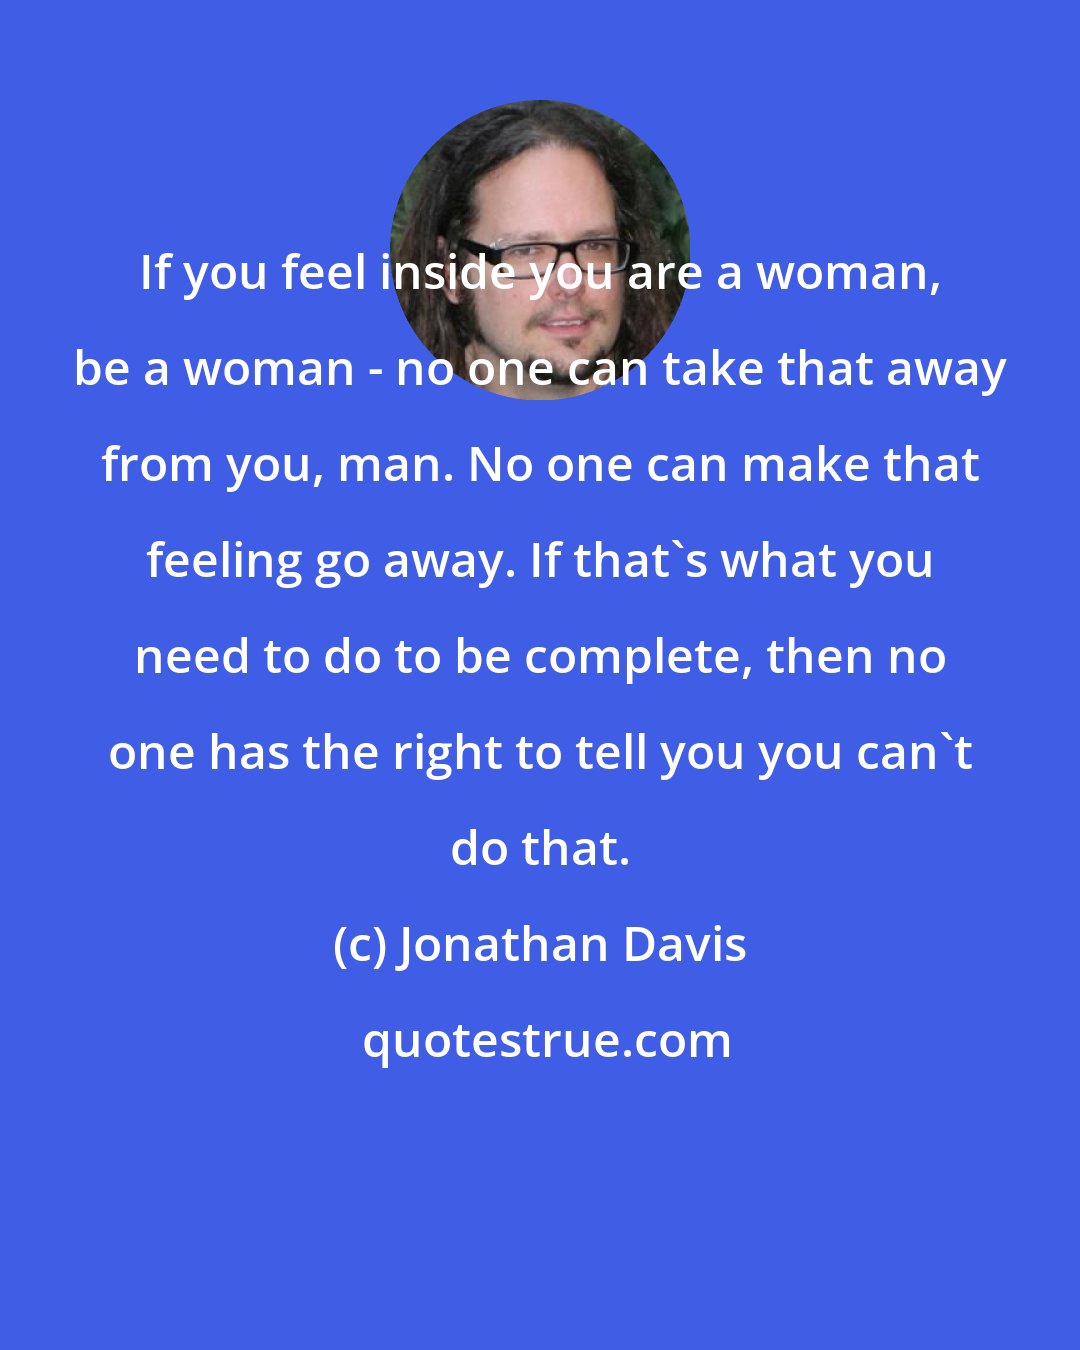 Jonathan Davis: If you feel inside you are a woman, be a woman - no one can take that away from you, man. No one can make that feeling go away. If that's what you need to do to be complete, then no one has the right to tell you you can't do that.